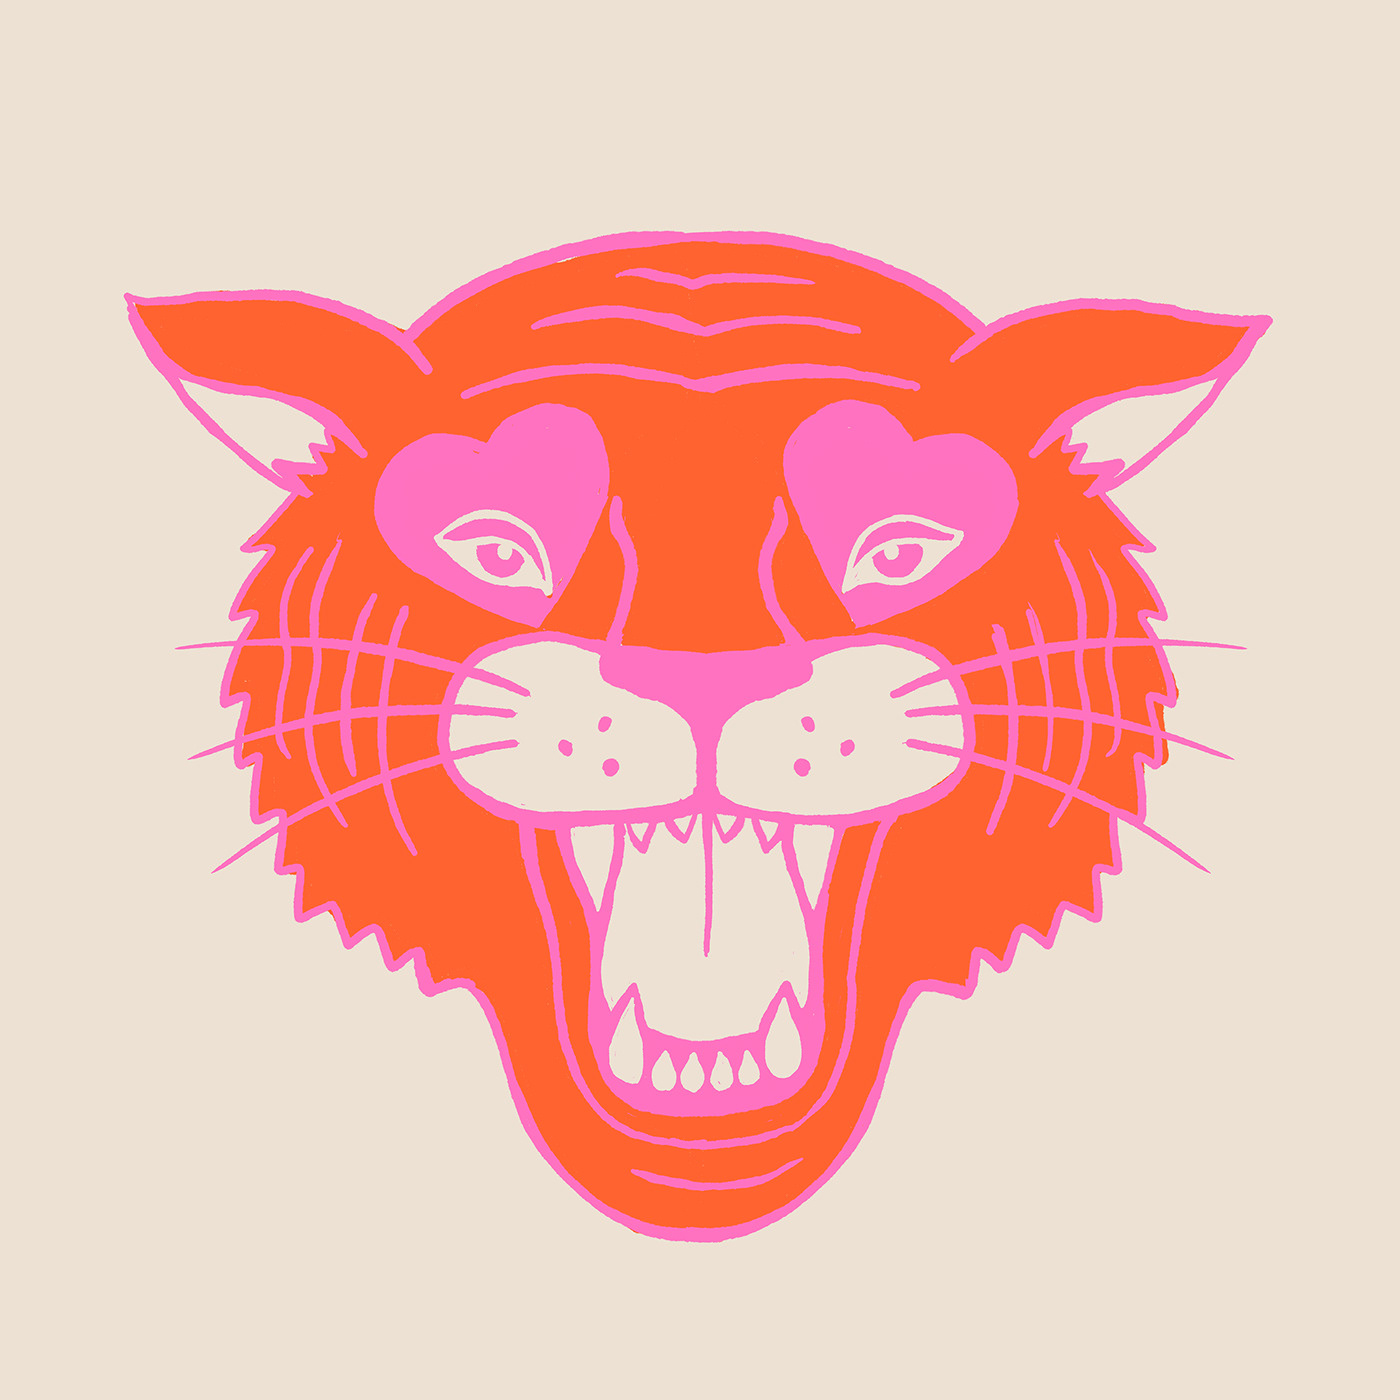 An illustration of a tiger face with hears around the eyes in a bright neon pink and orange color.